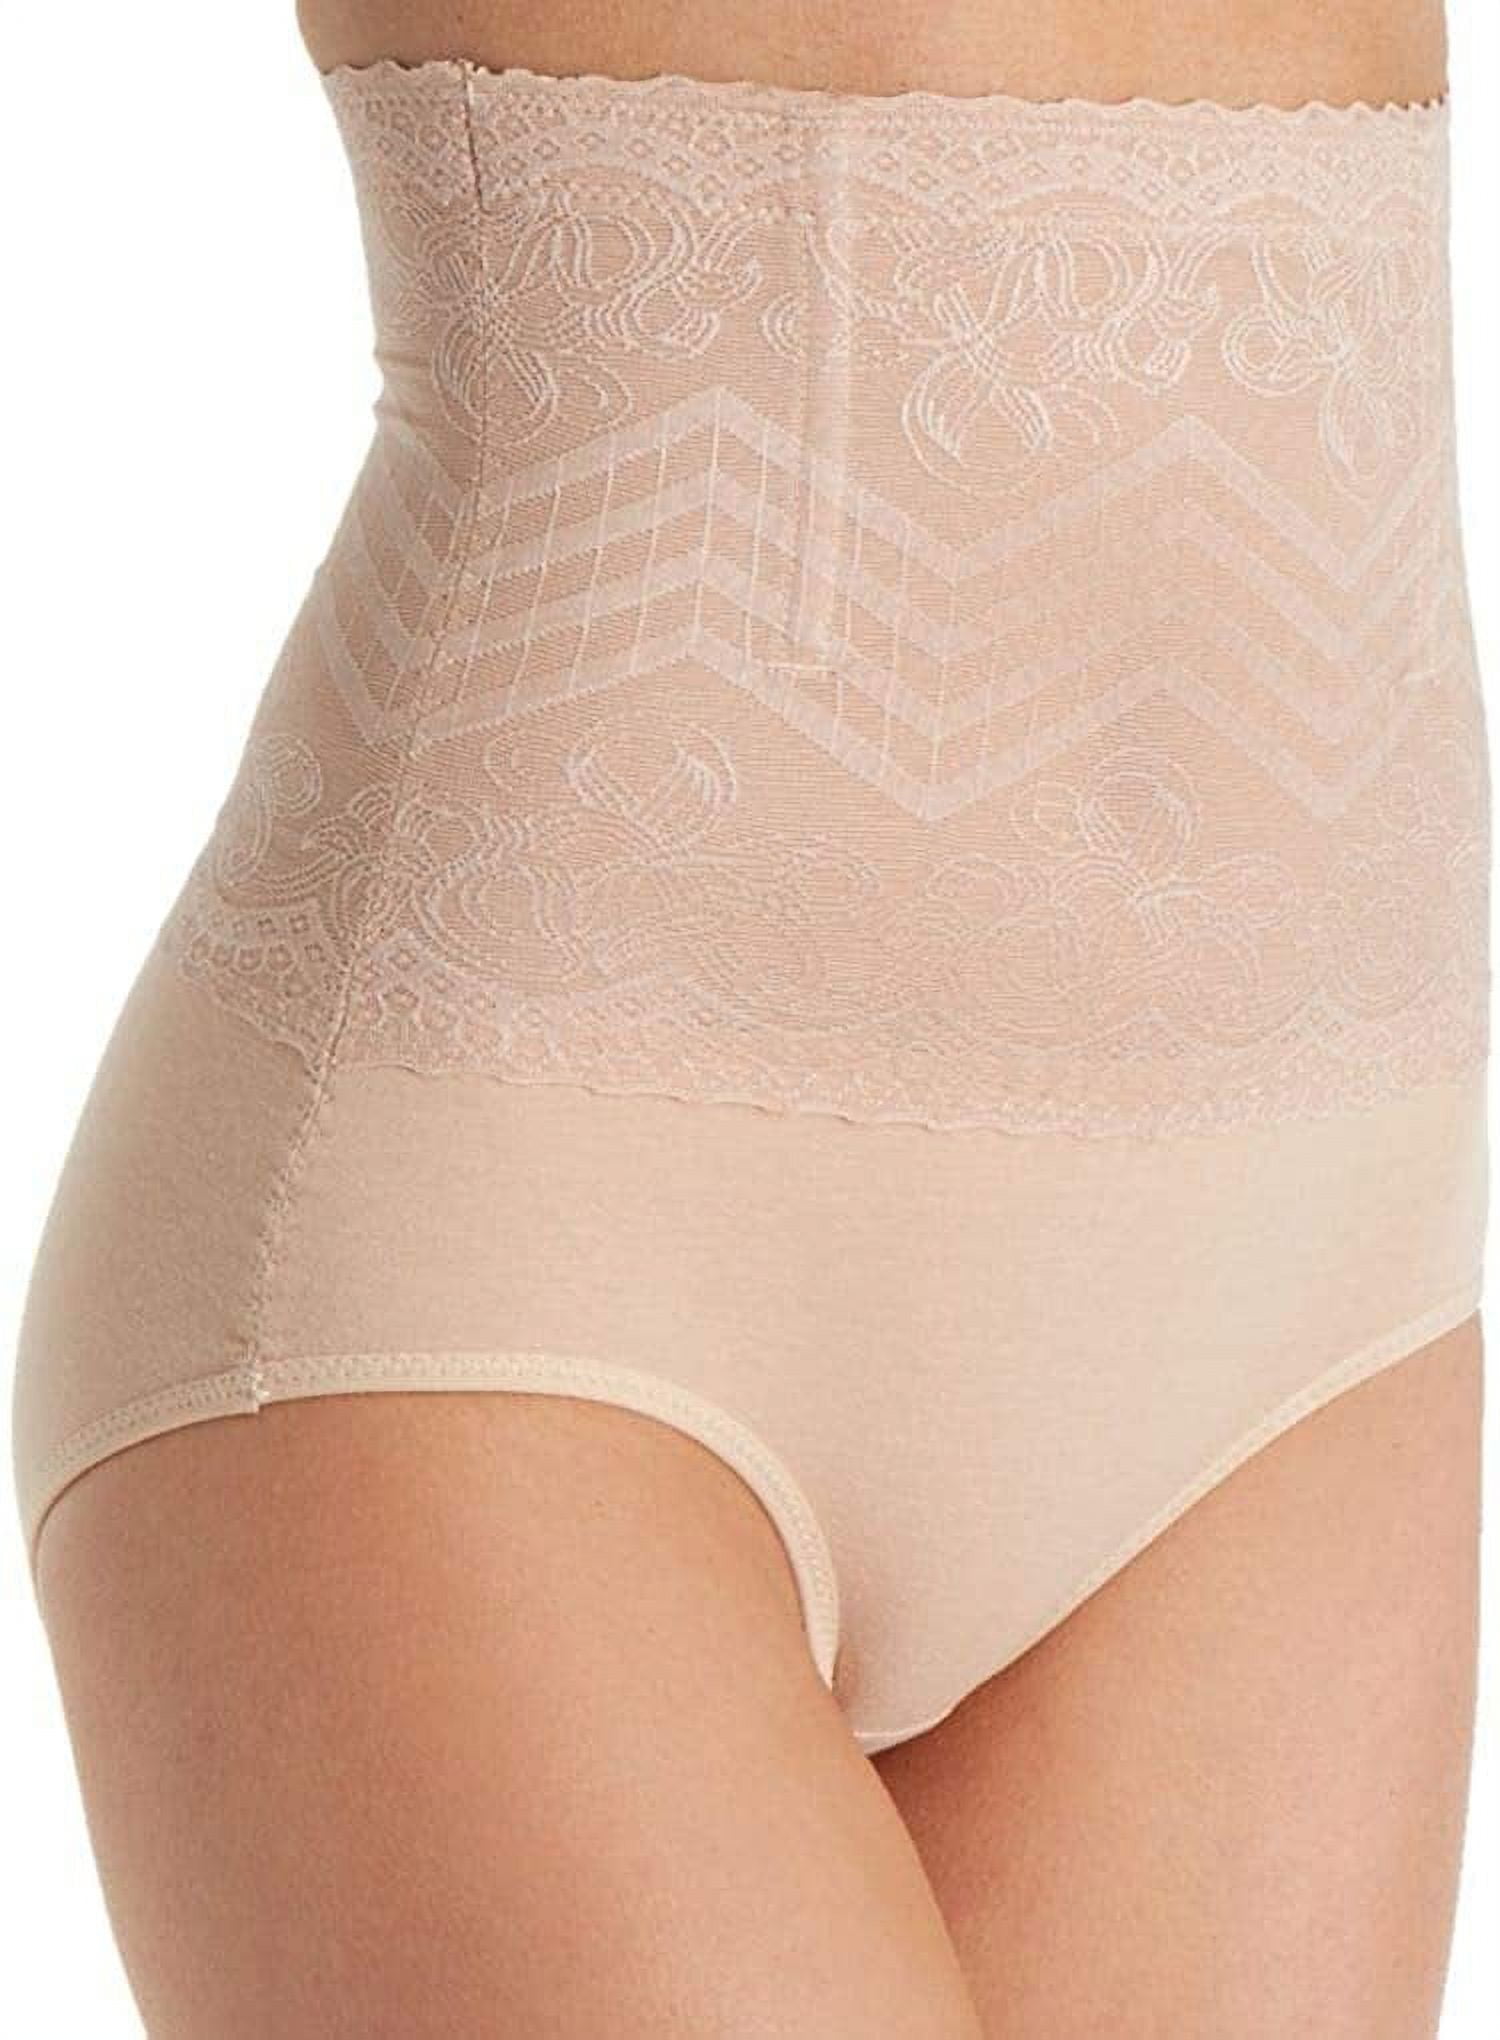 MISS MOLY Tummy Control Thong Shapewear for Women Seamless Brief Shaping  Thong Panties Body Shaper Underwear 